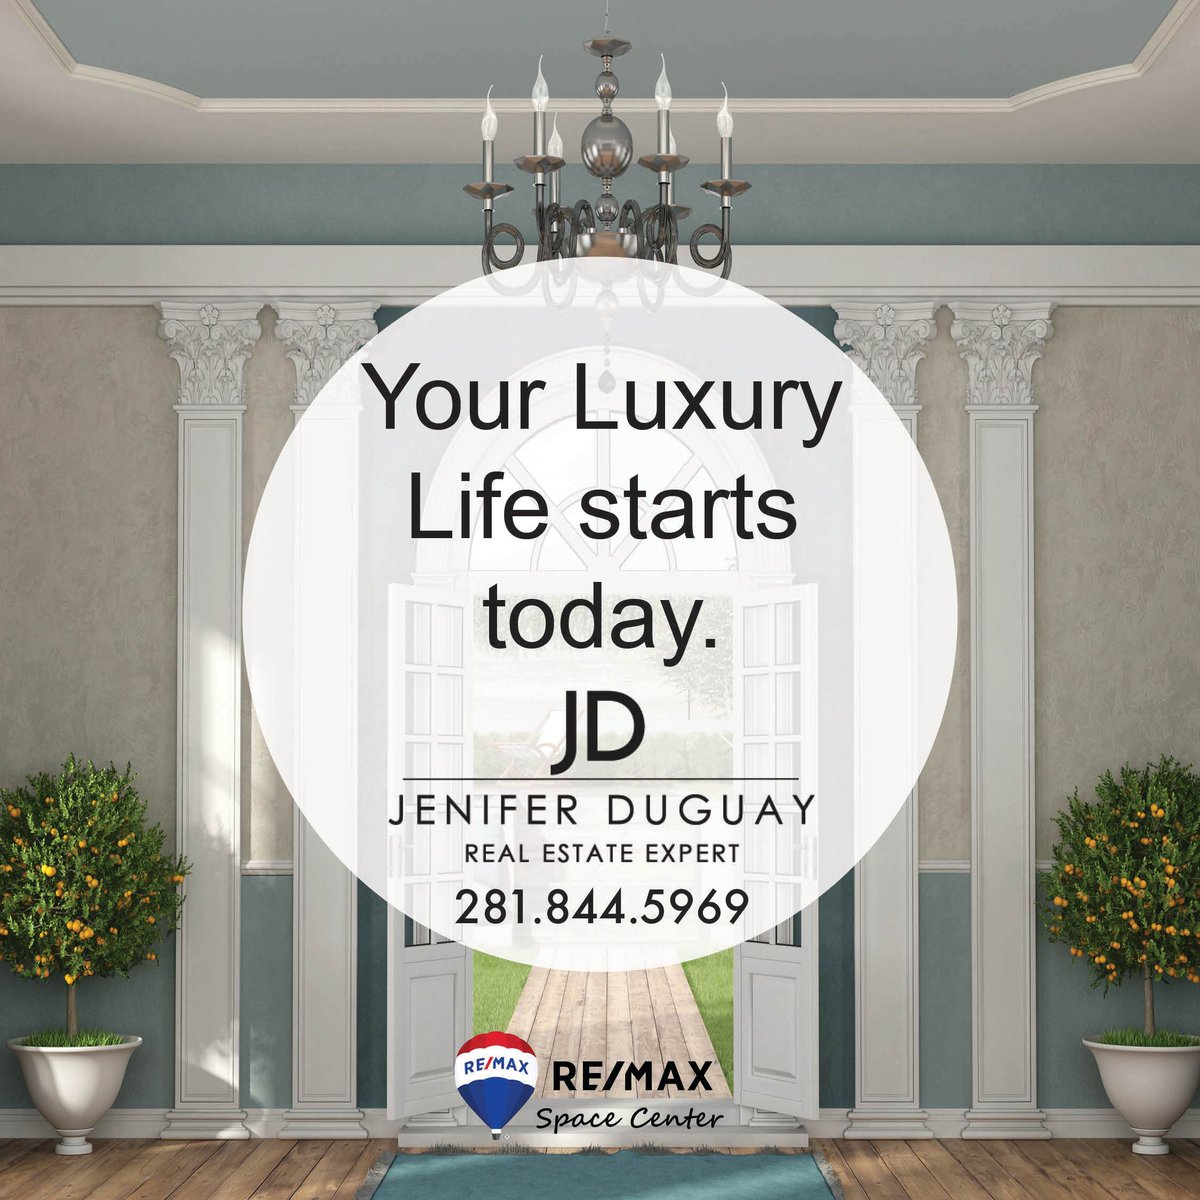 Your LUXURY life starts today!
Call me at 281-844-5969 - I am ready to help you!

#pearlandrealestate #houstontealestate #pearlandtx #shadowcreek #homesforsale #texashomesforsale #remaxhustle